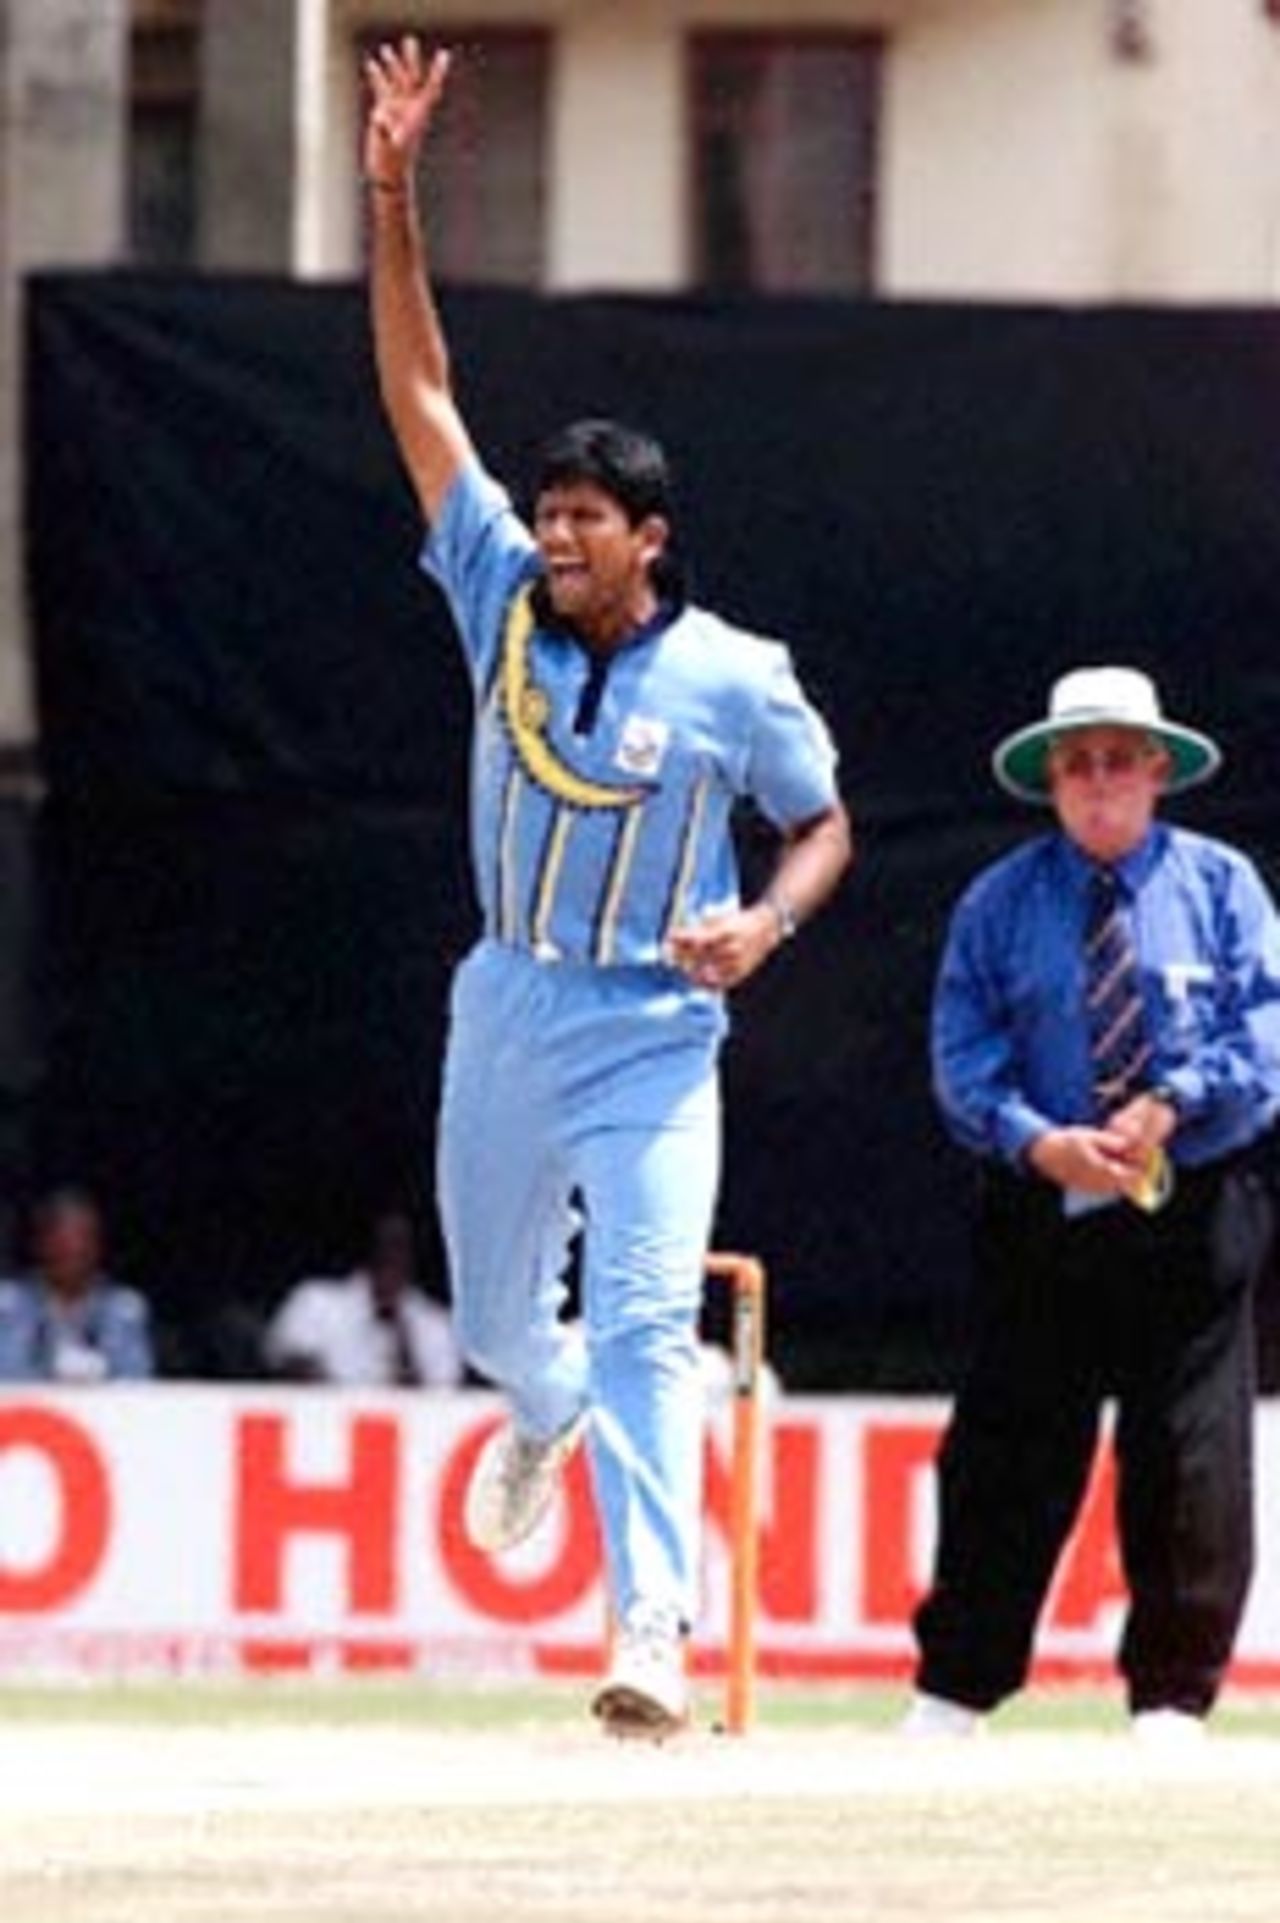 A jubiliant Prasad after picking up the wicket of Fleming. ICC KnockOut 2000/01, Final, India v New Zealand, Gymkhana Club Ground, Nairobi 15 October 2000